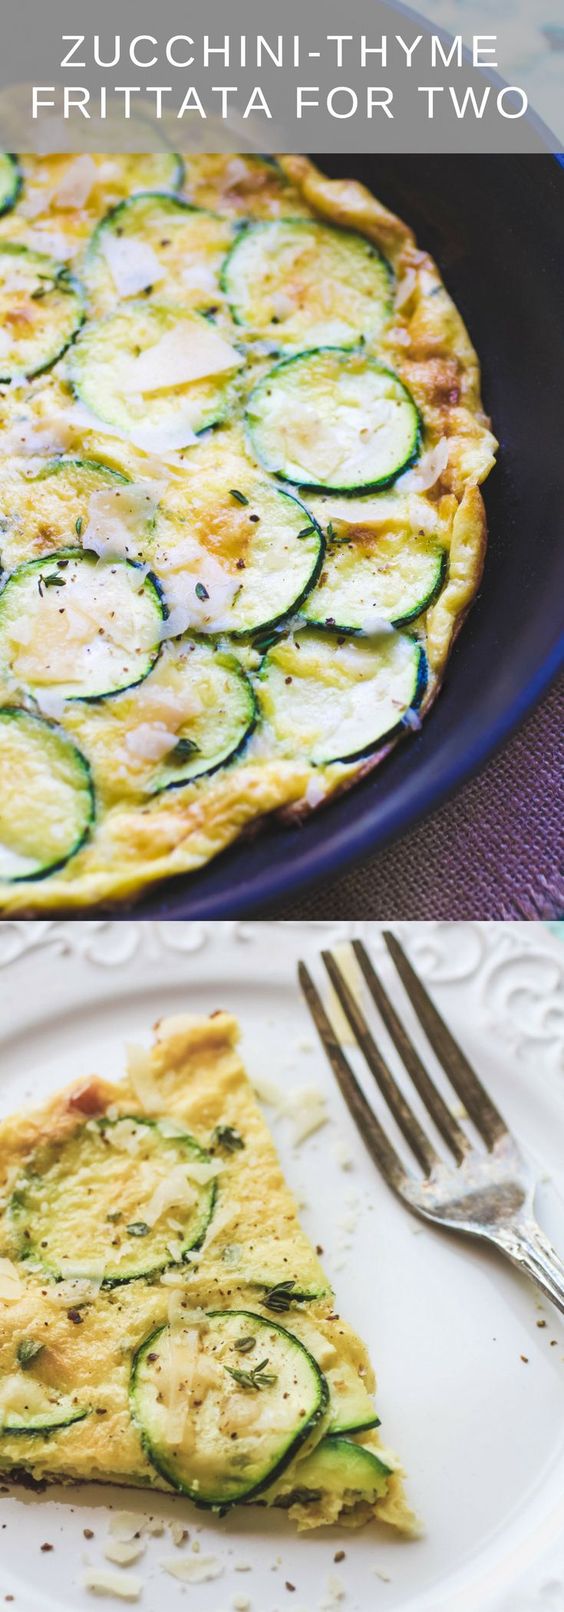 Find healthy breakfast options like this zucchini thym frittata and other easy meals for two in this awesome post. Learn how to prepare quick and healthy meals for two. #healthymeals #healthyrecipes #healthyeating #nutrition #nobake #highprotein #mealprep